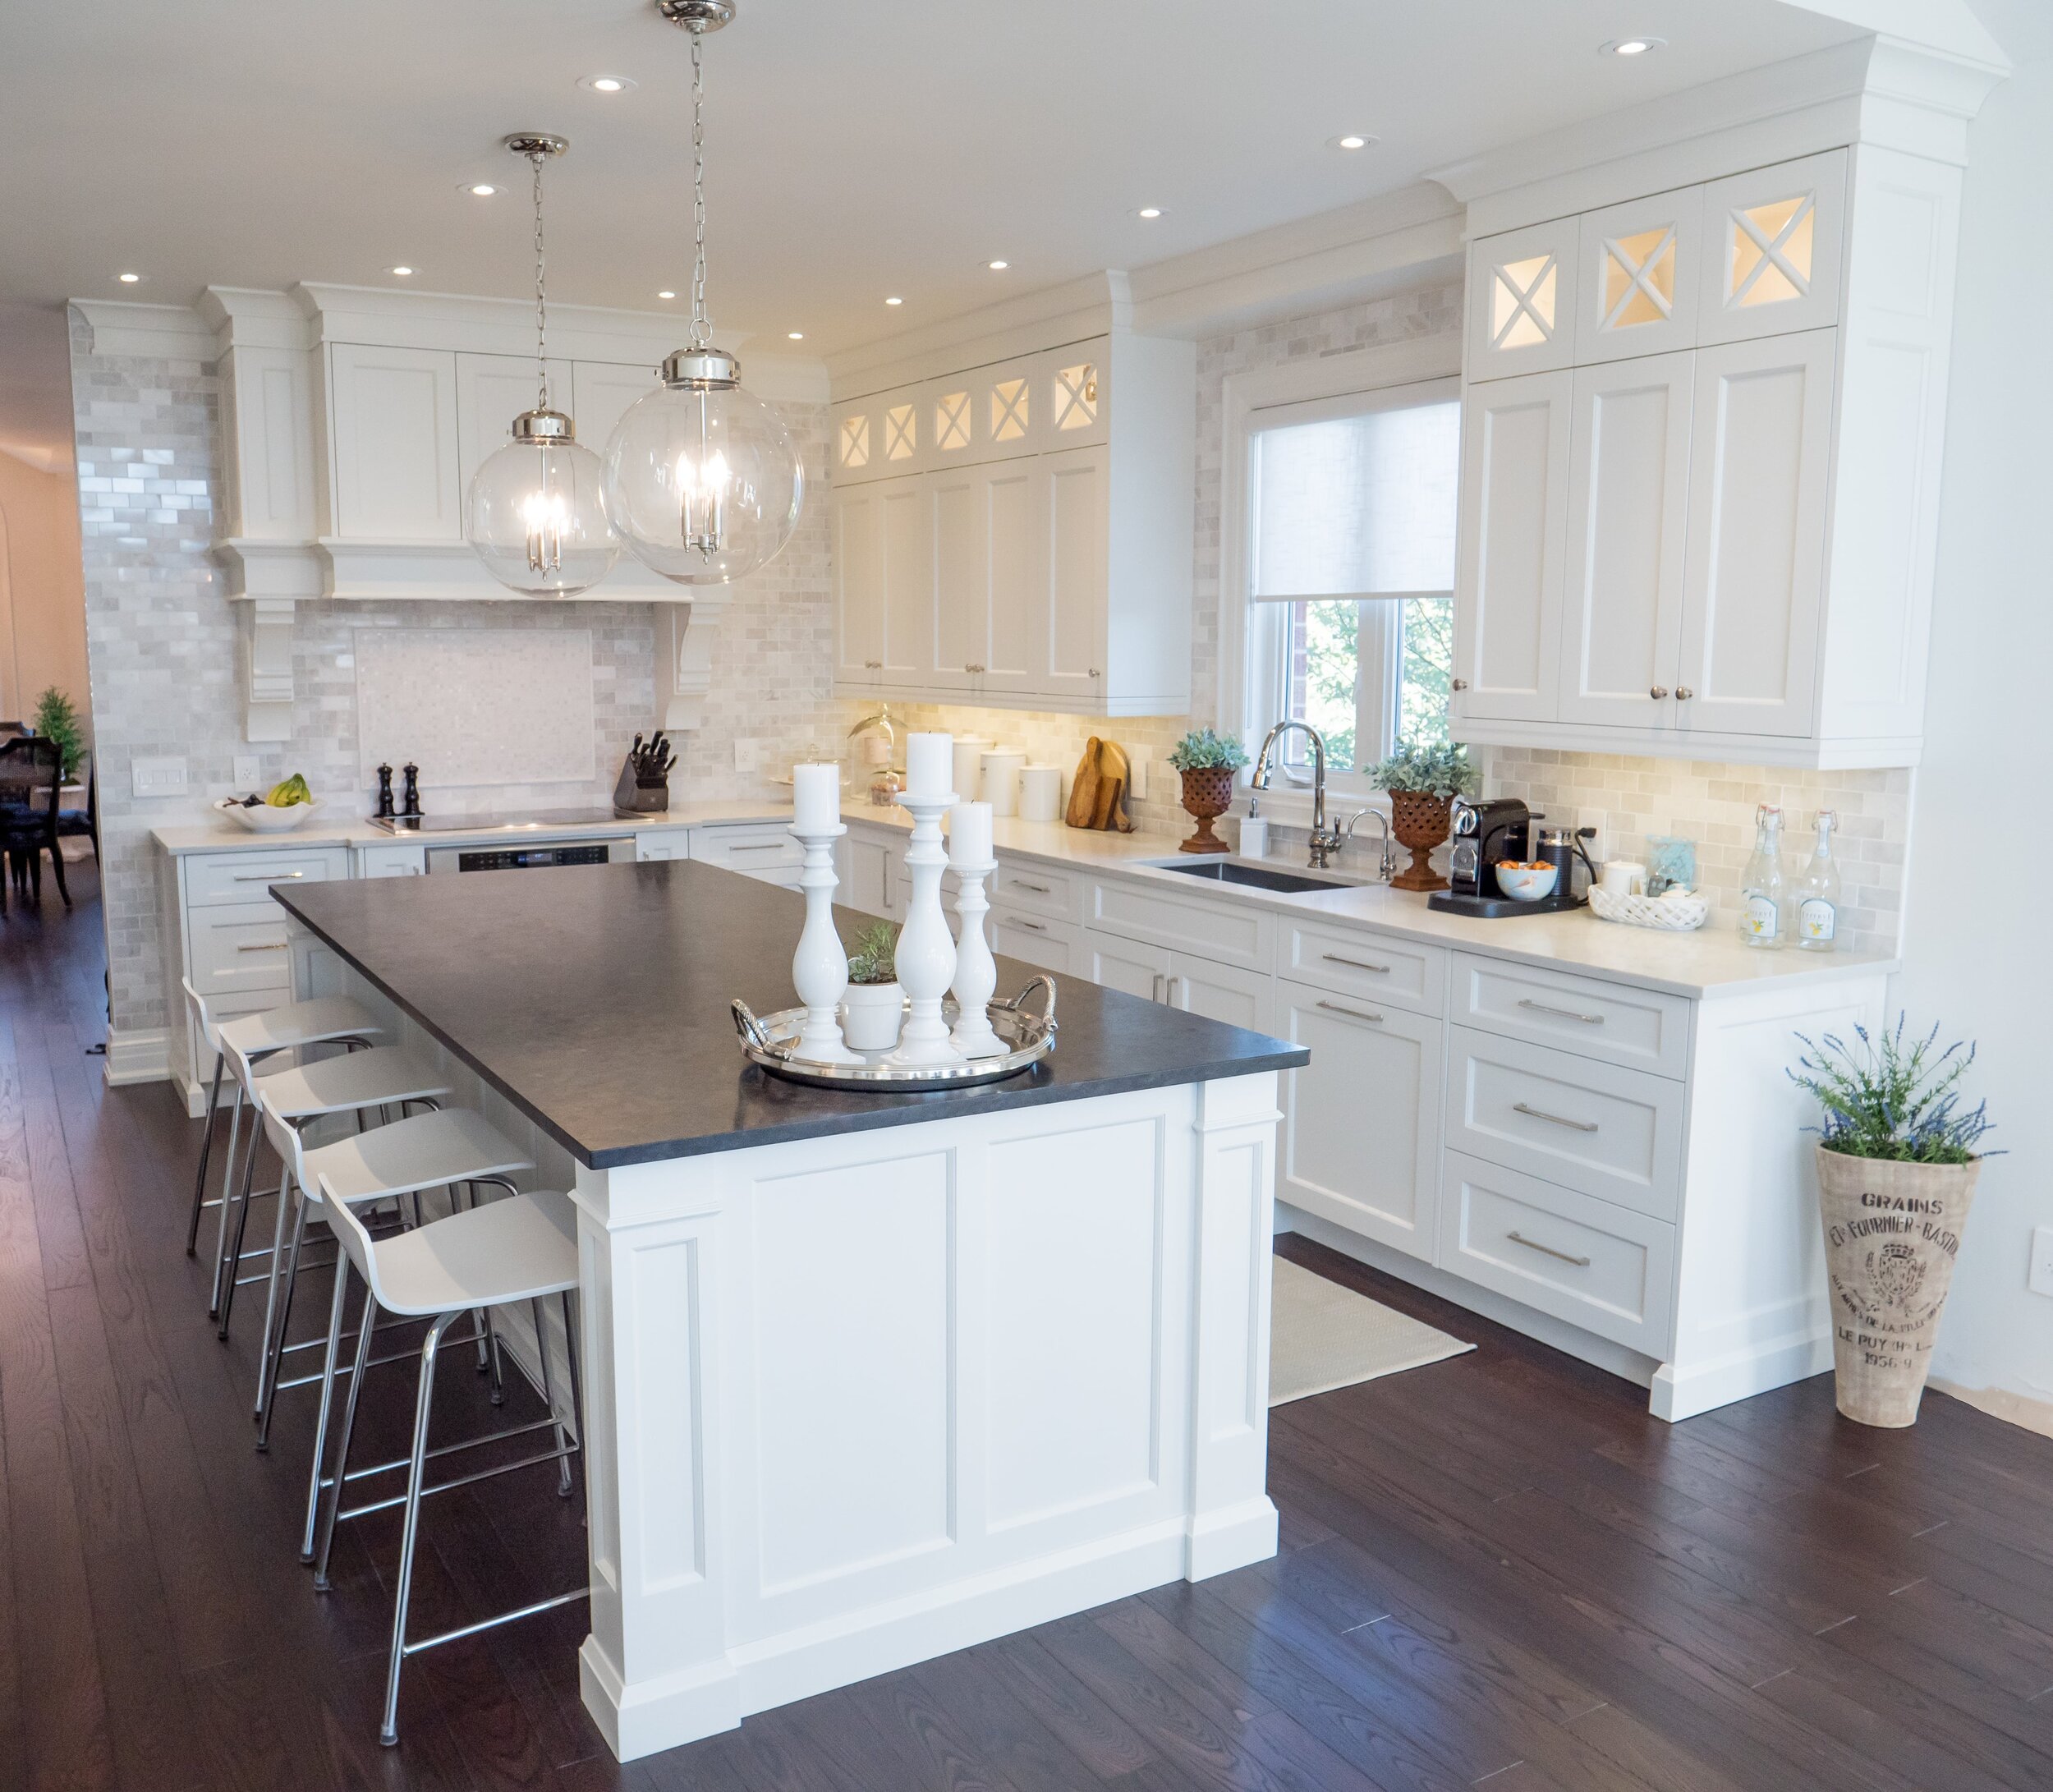 A bright kitchen with an island and four bar stools.